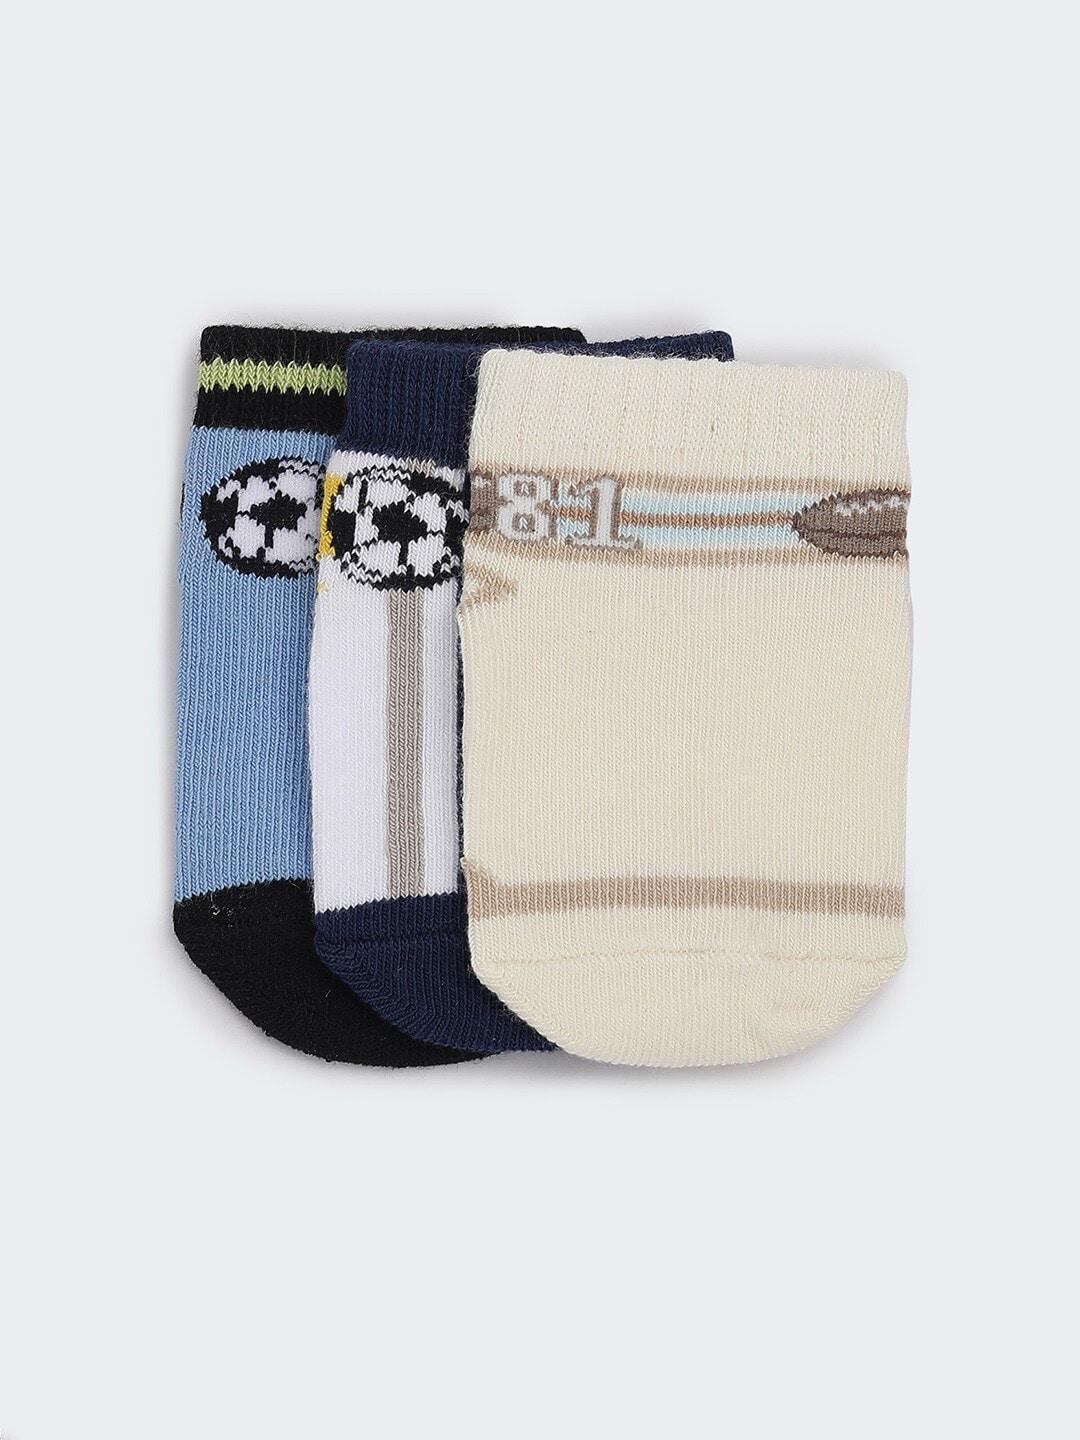 max boys pack of 3 patterned shoe liners socks